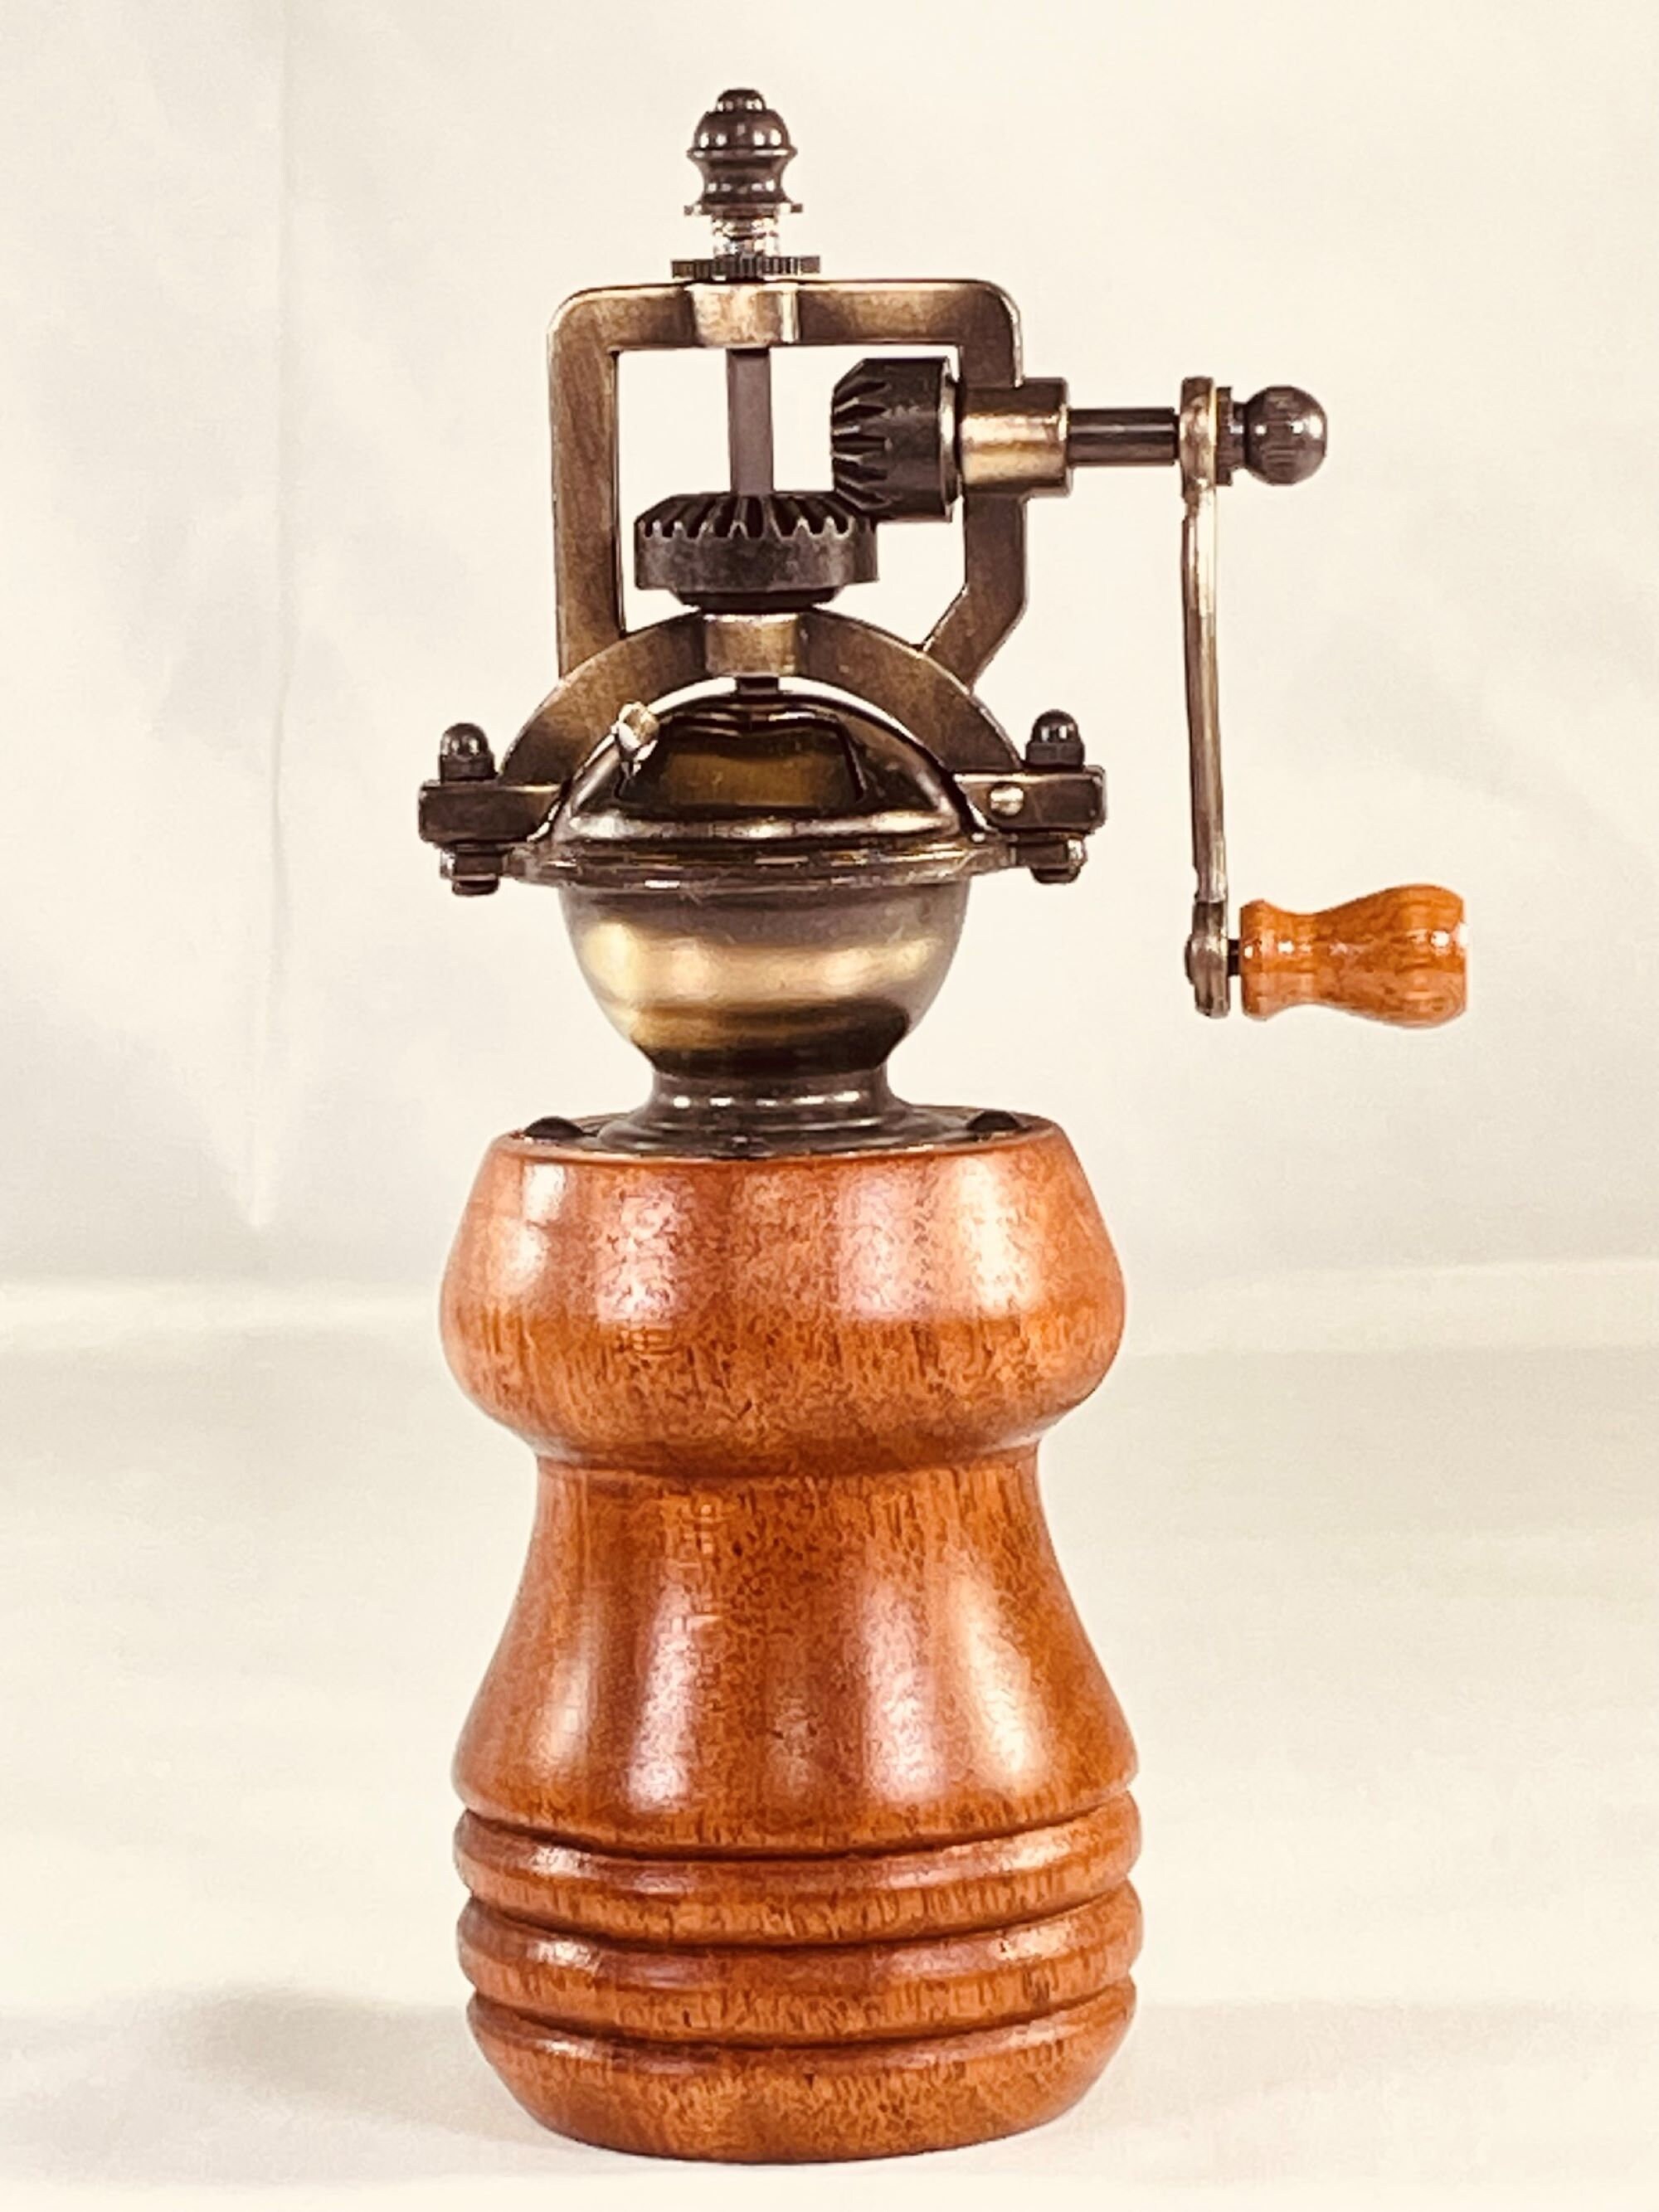 Vintage Exposed Gear Hand Crank Steampunk Style Pepper Grinder Mill Wooden  Base